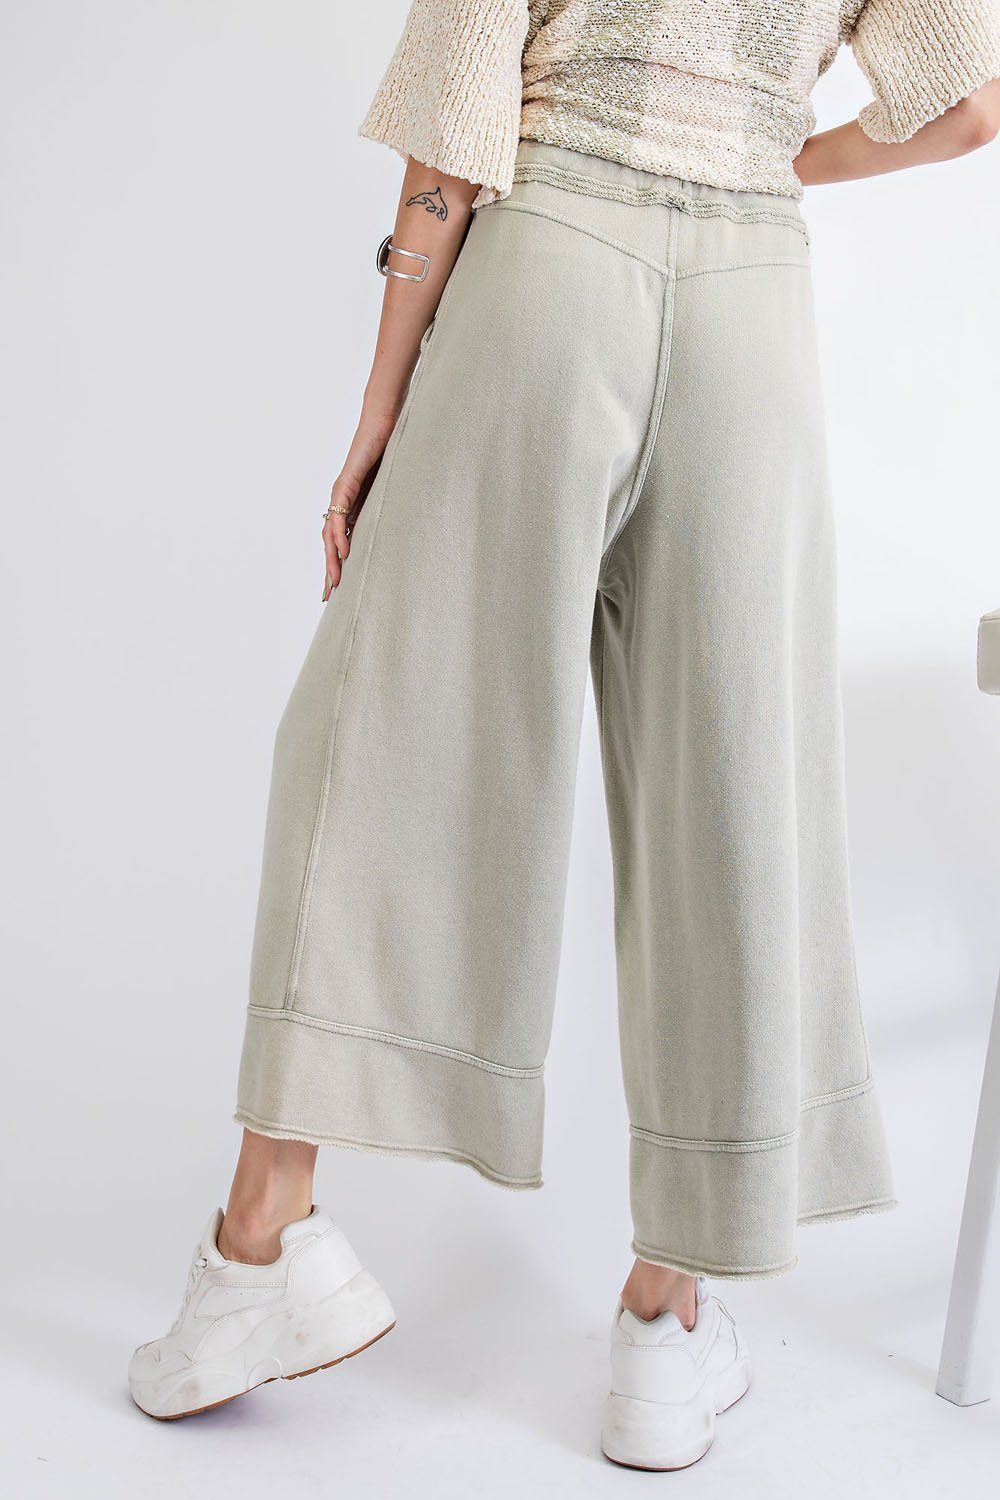 Garment Dye Terry Knit Bottom with Frayed Hems  Ivy and Pearl Boutique   